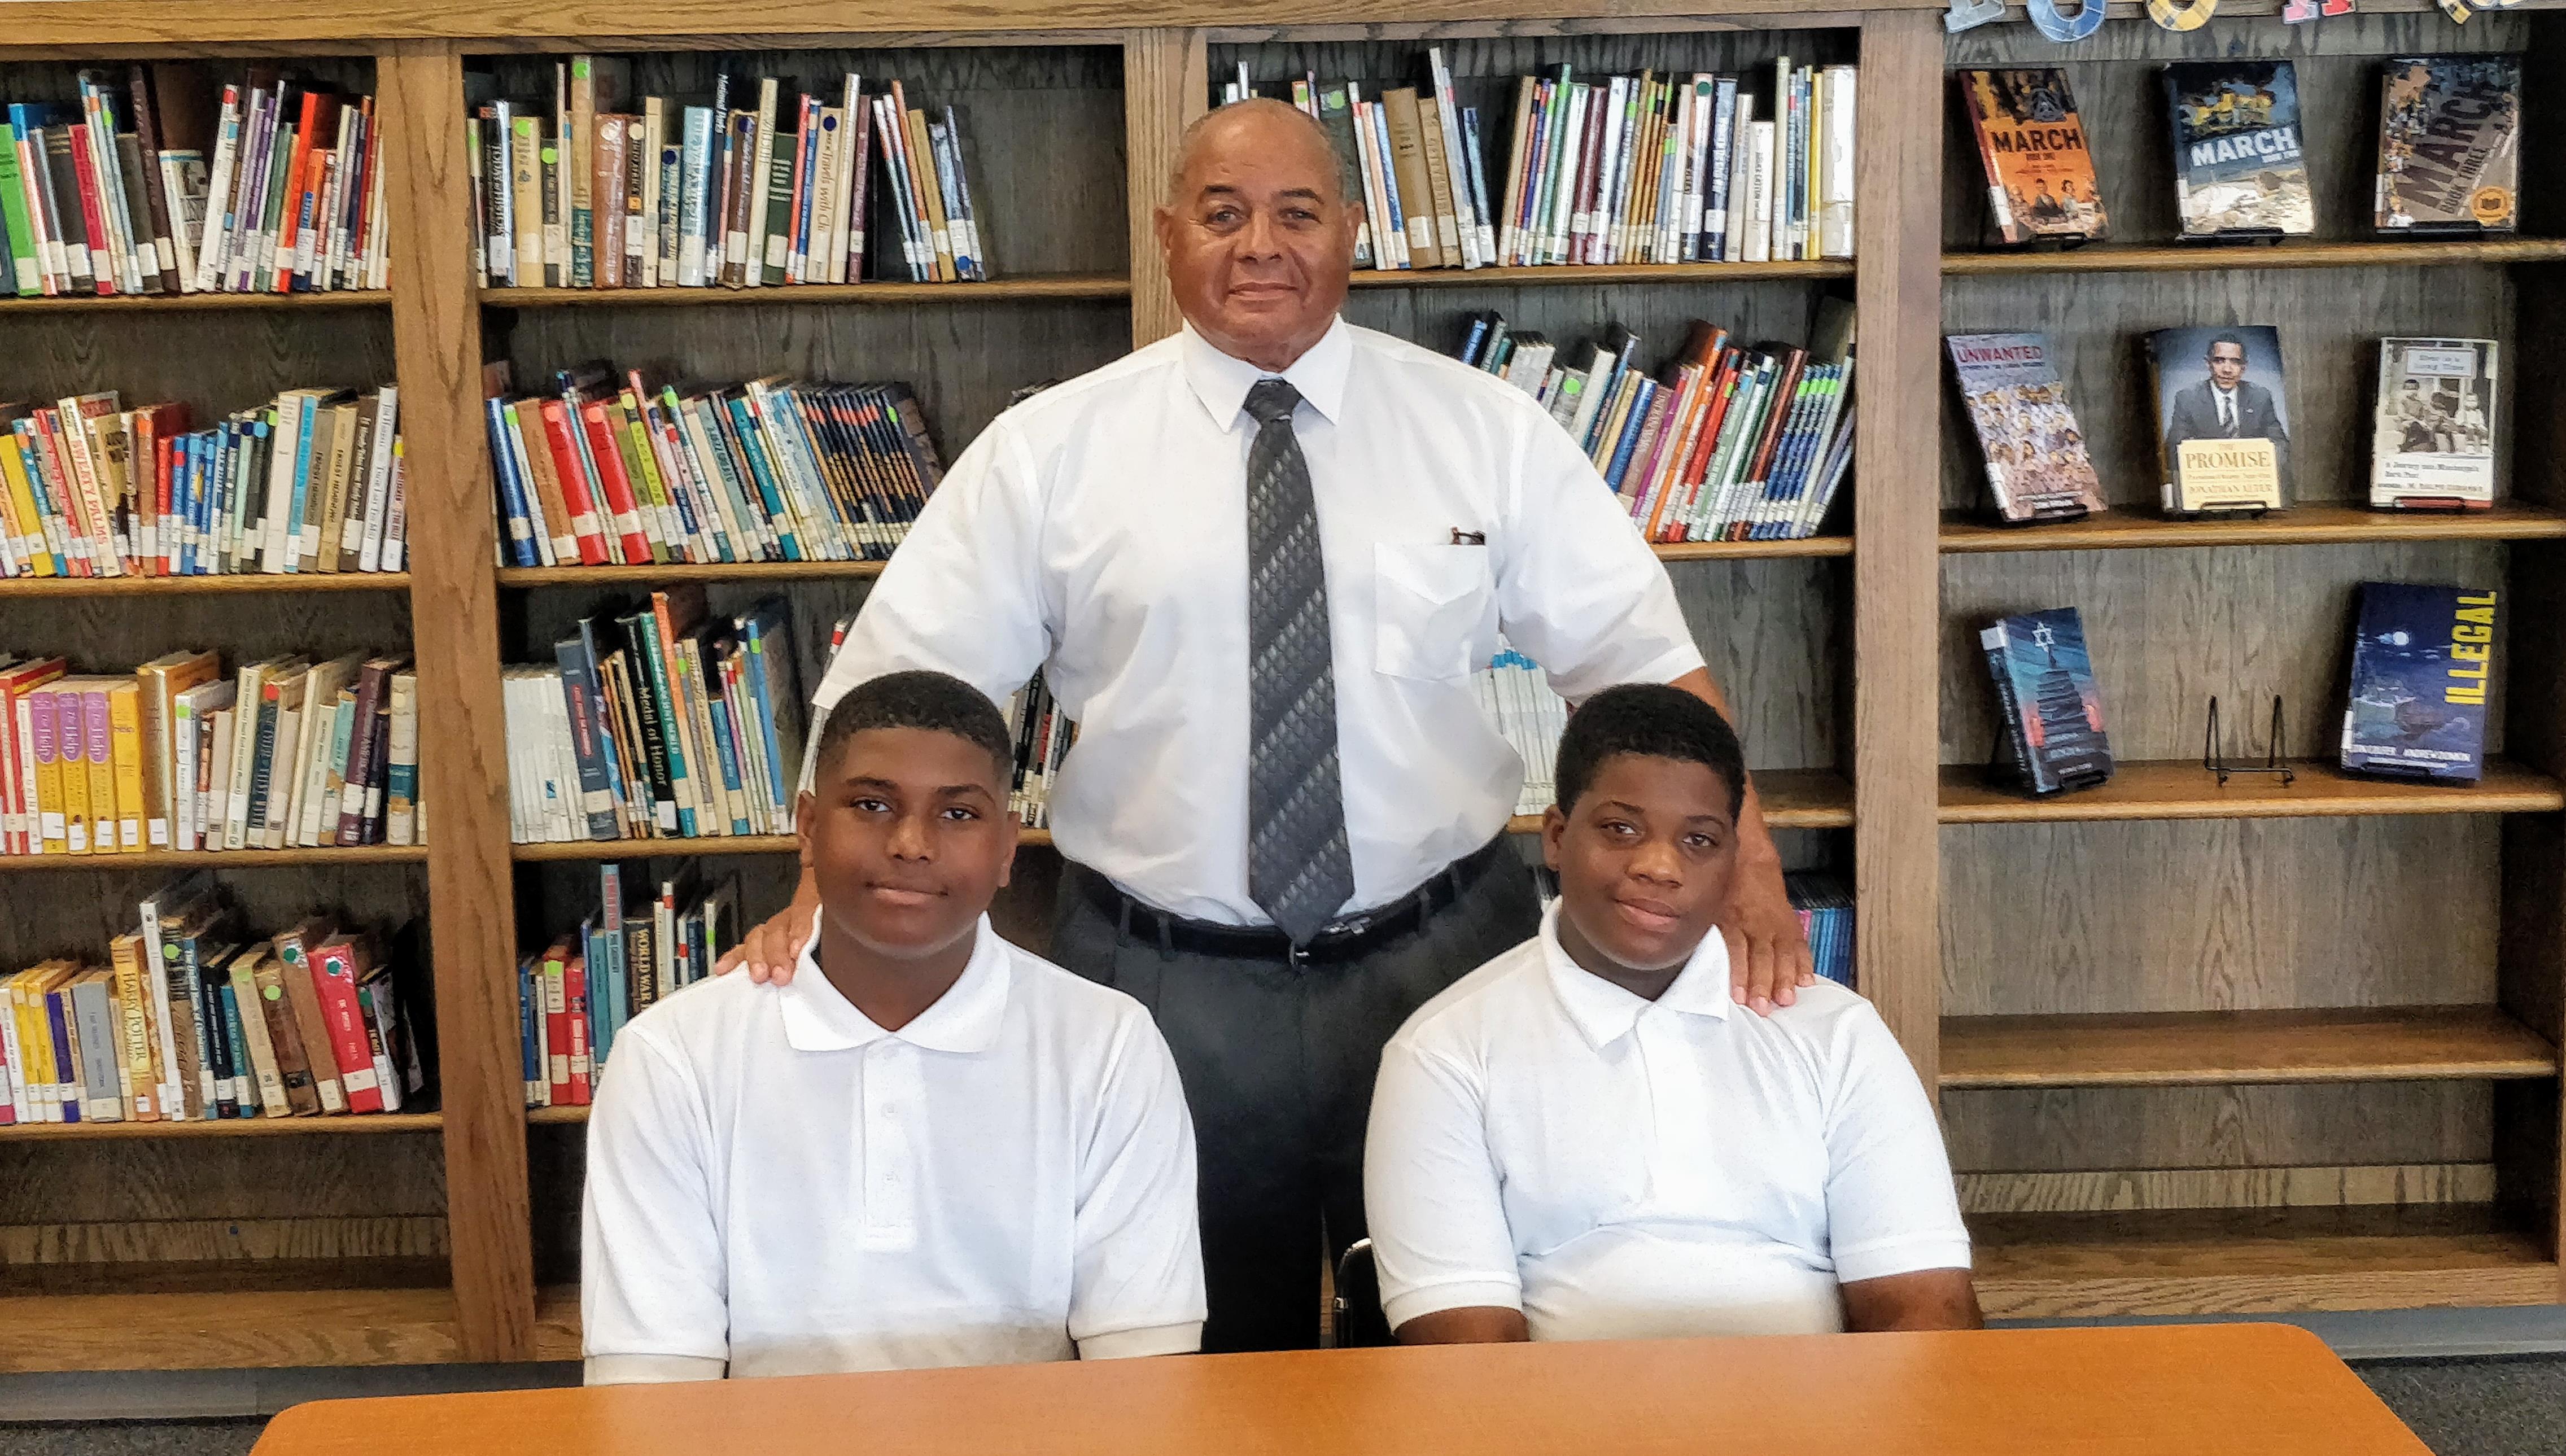 Pictured: (Left) Tamarcus Harkins, (Right) Joshua Taylor, Principal Fred Young